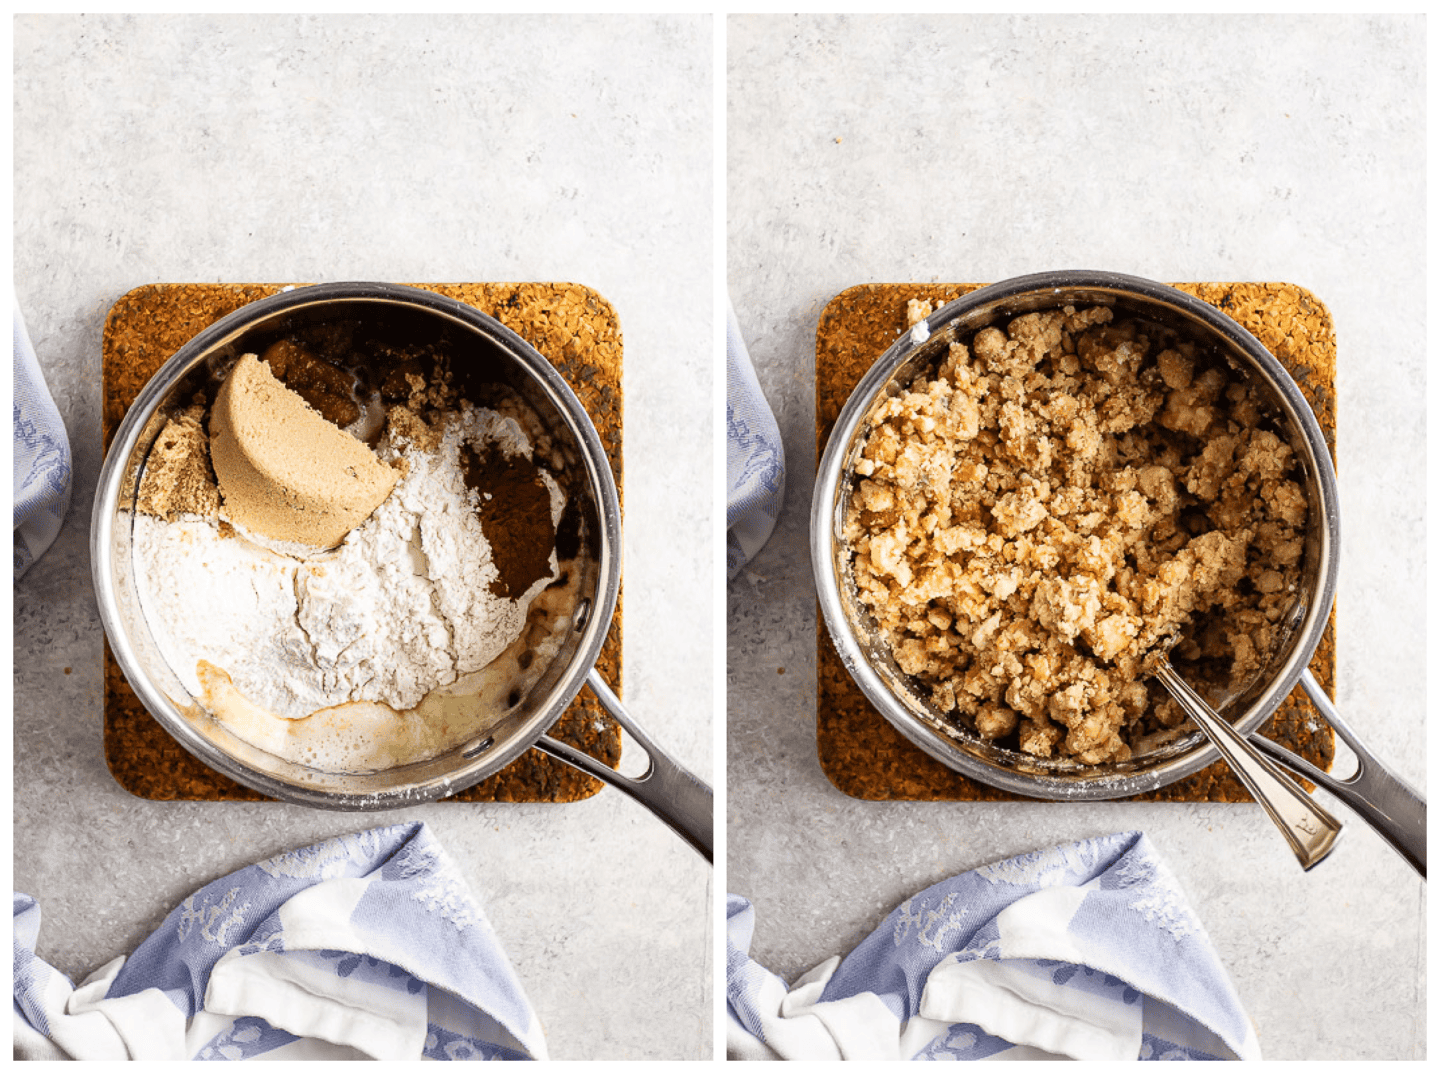 Image collage showing how to make crumb topping.